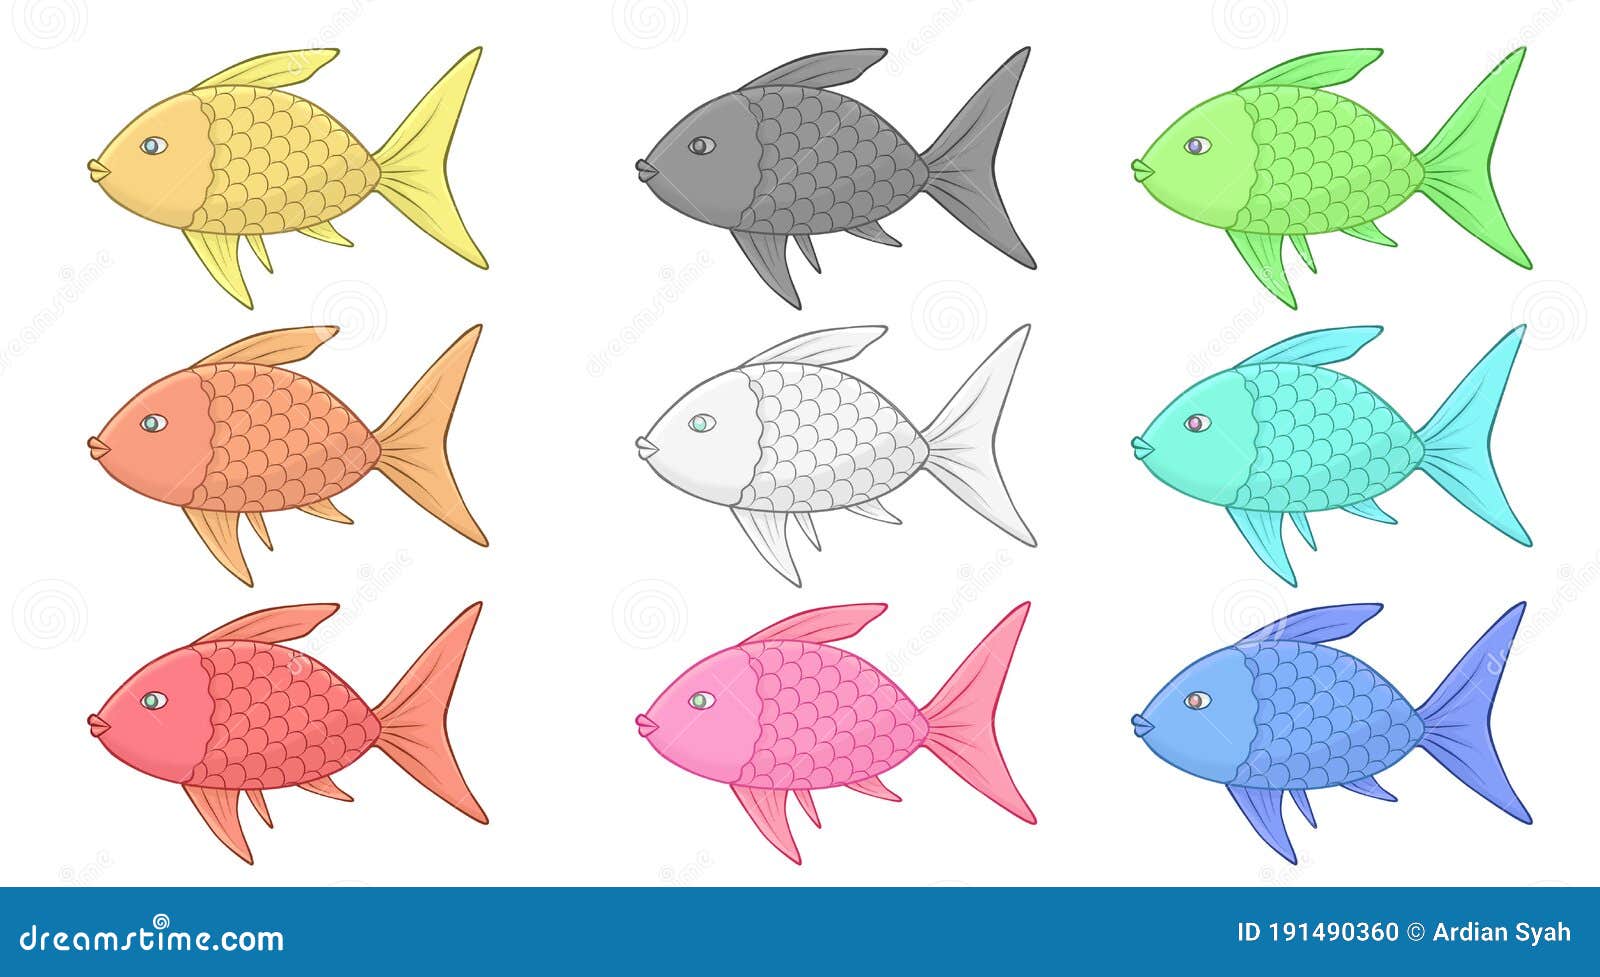 Simple Stock of Colorful Fish Drawing for Children Stock Illustration -  Illustration of colorful, fishing: 191490360